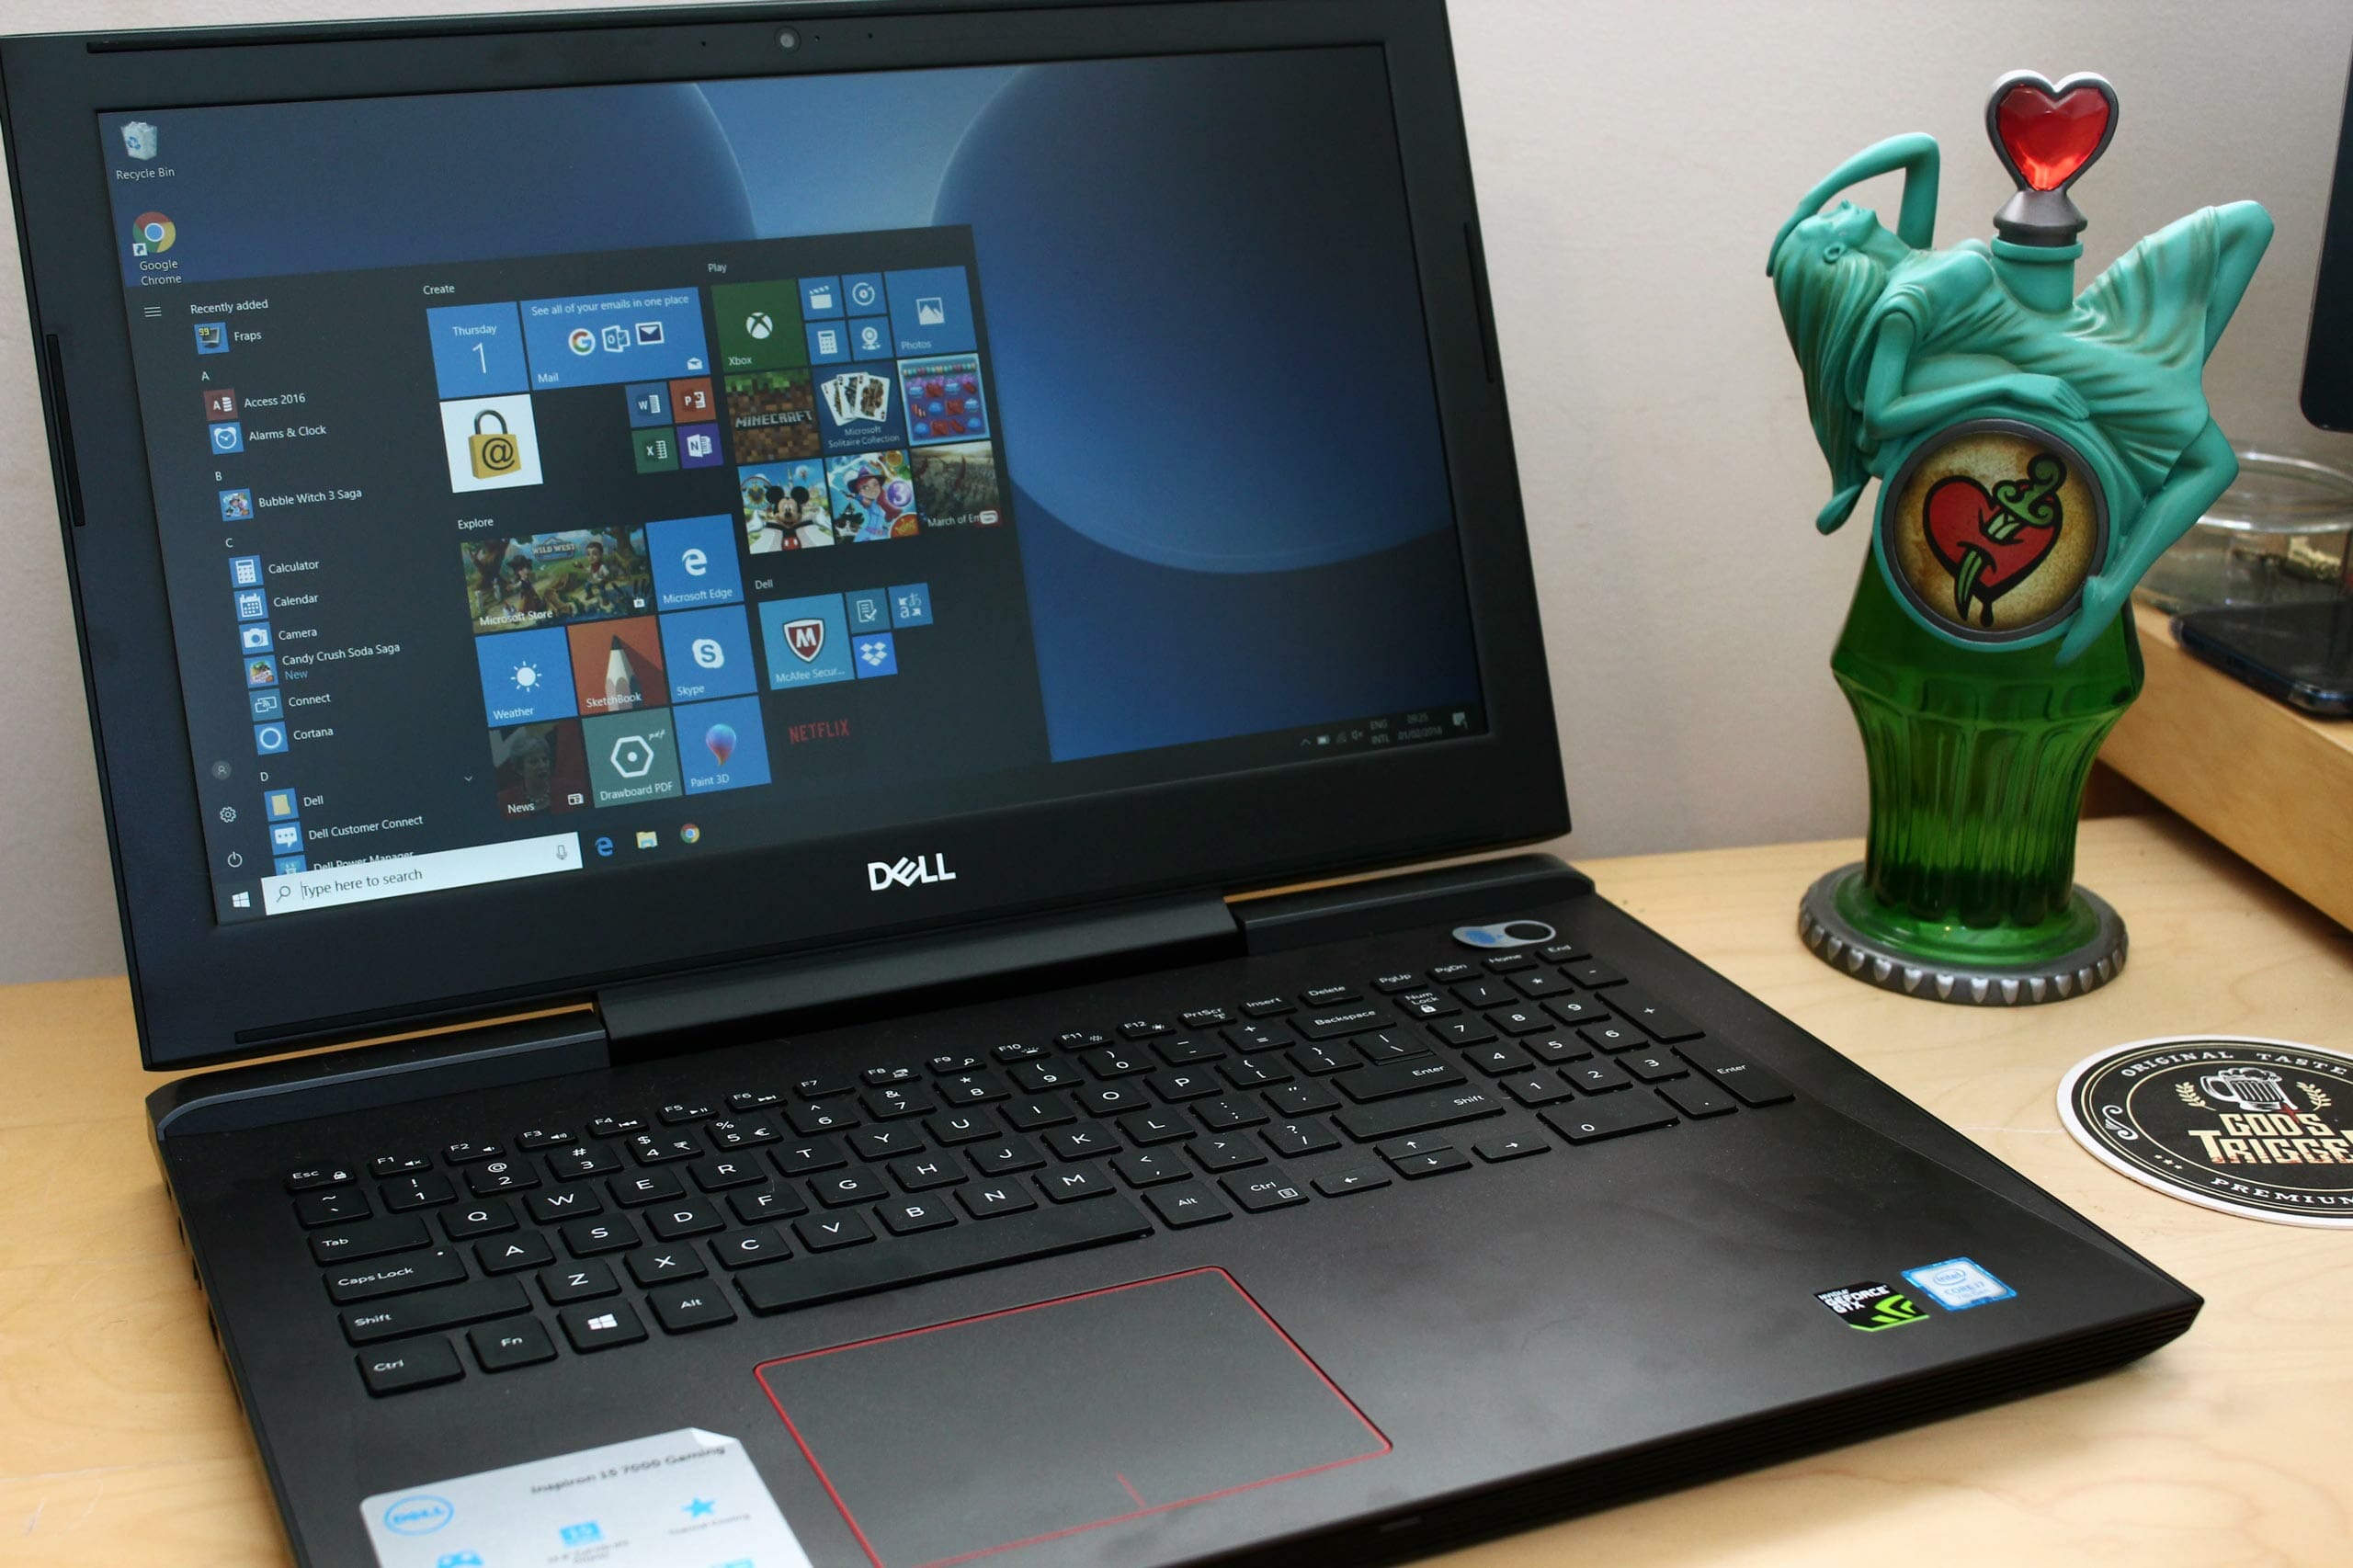 Dell Inspiron 15 7000 (7577) Gaming Laptop Review - VGU